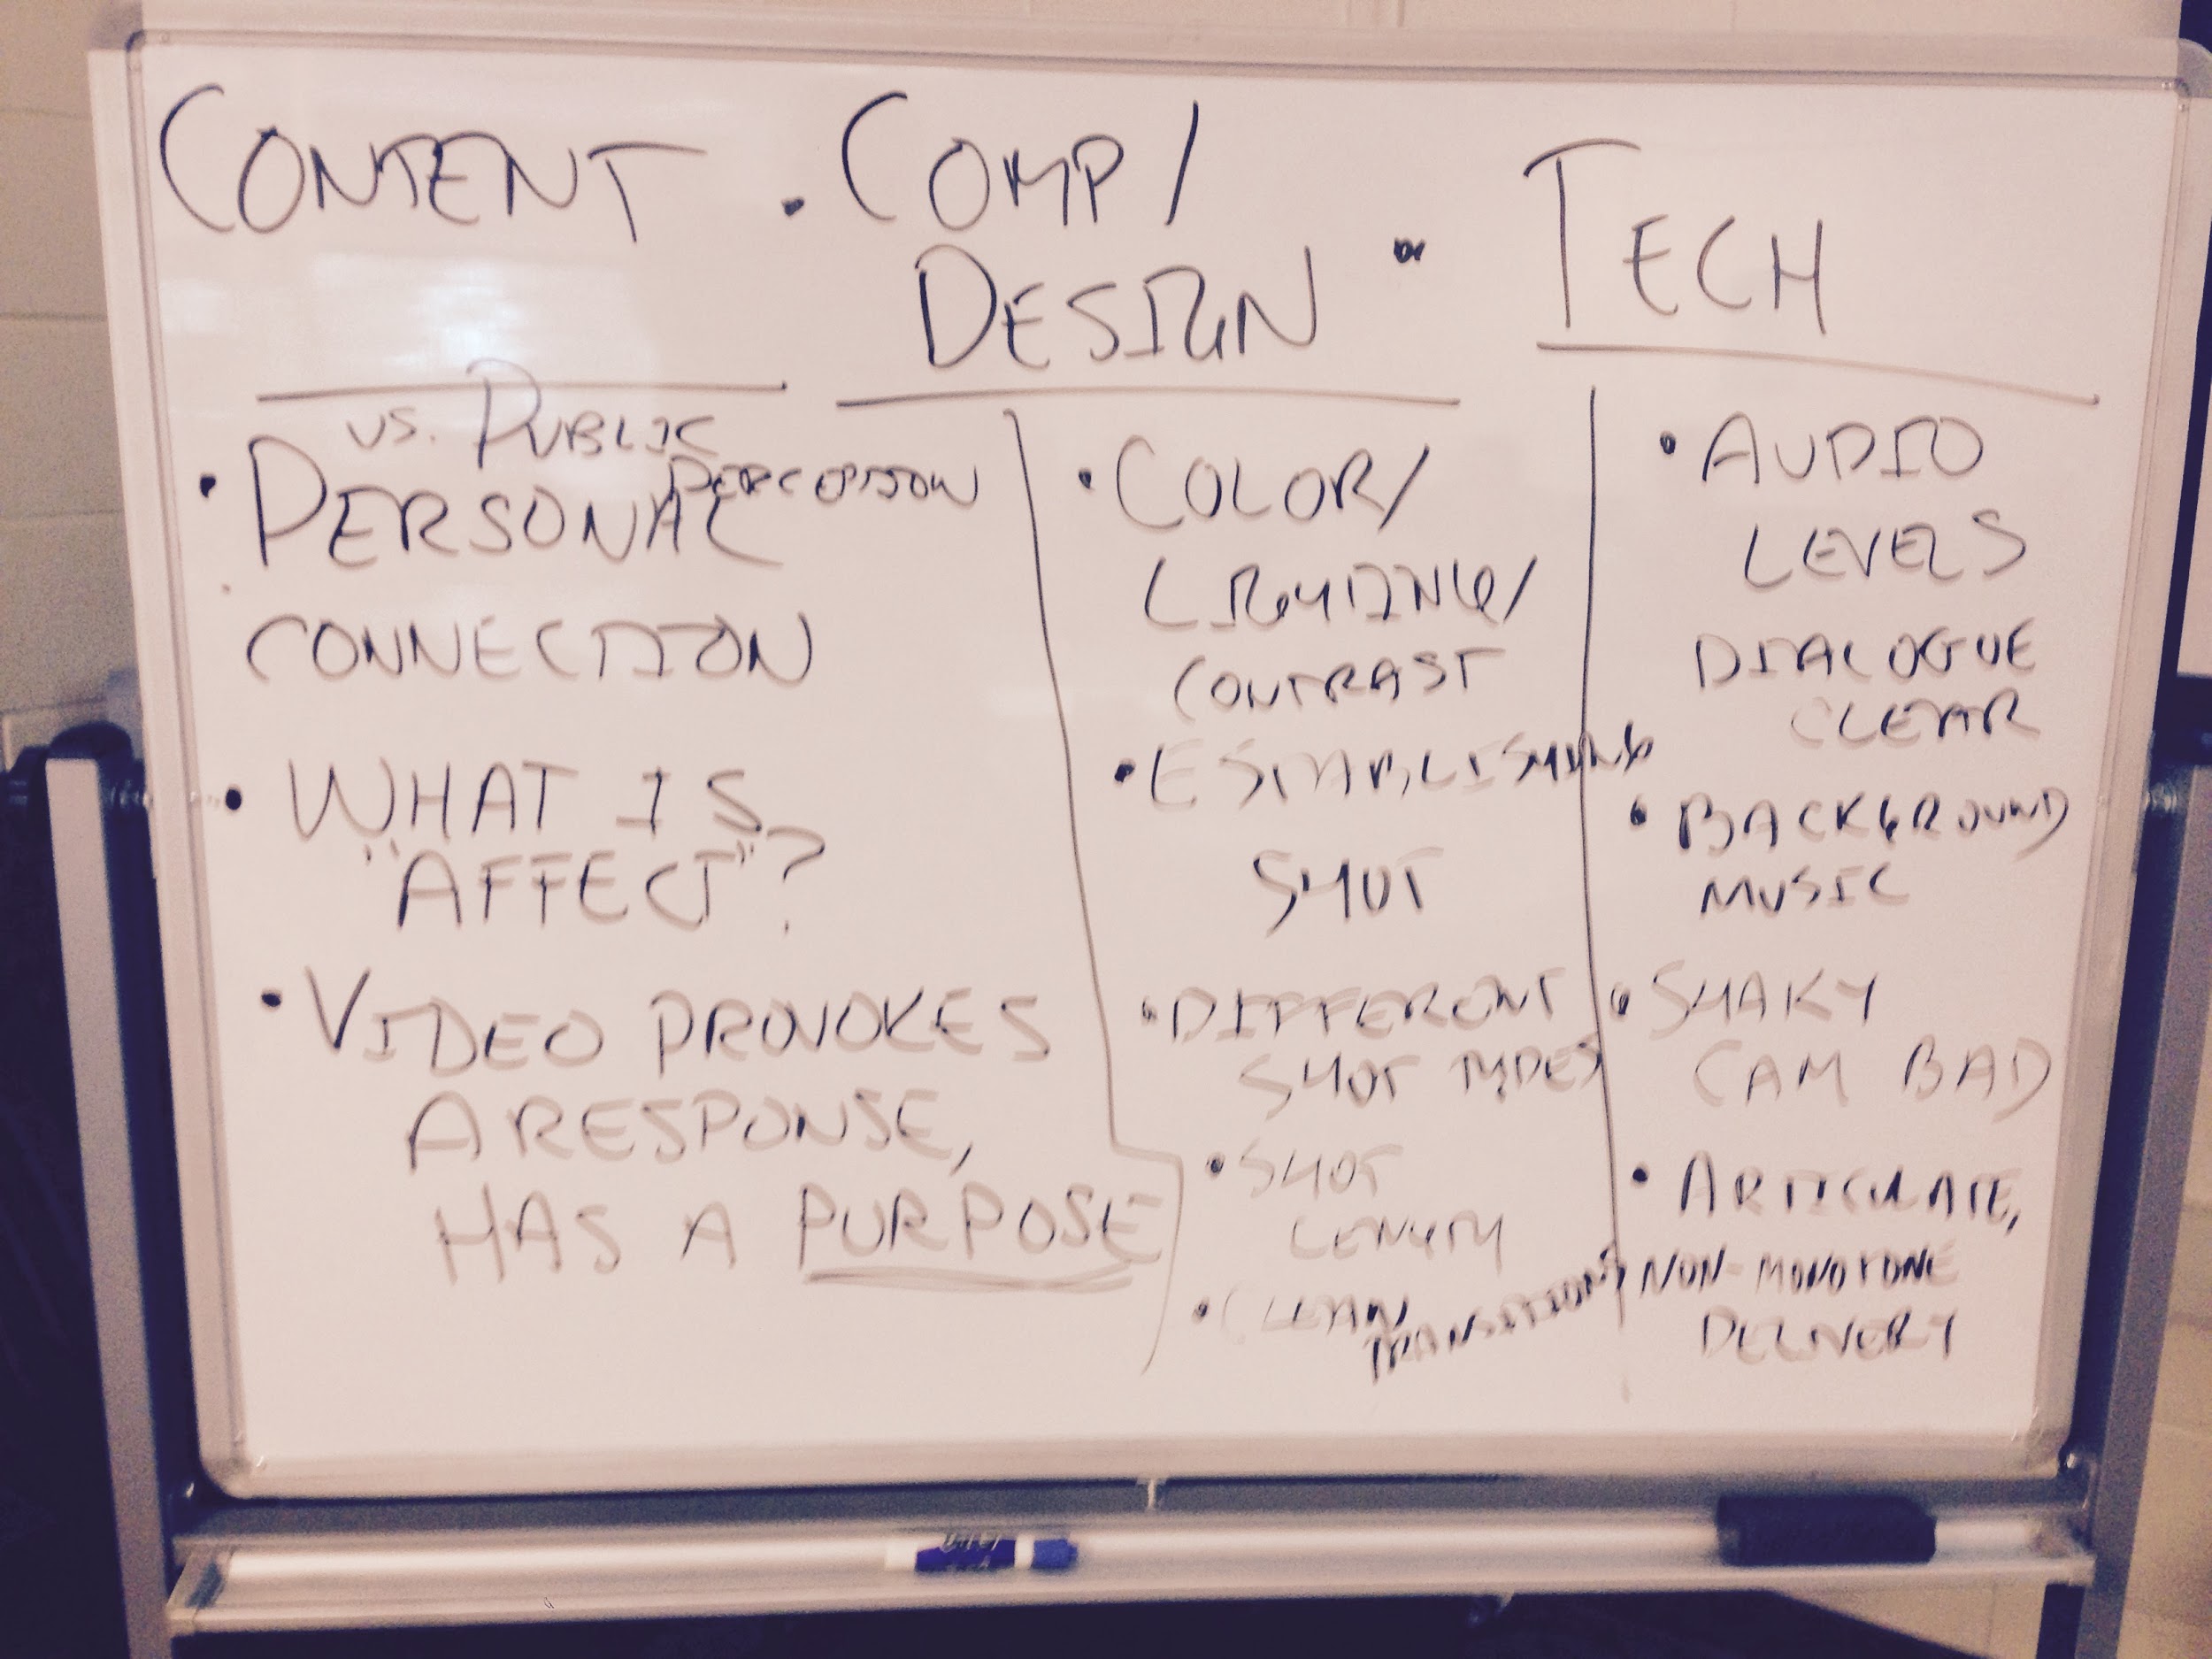 A photograph of a whiteboard with categories of evaluation--content, comp/design, tech--with qualities and questions to be considered for each category.